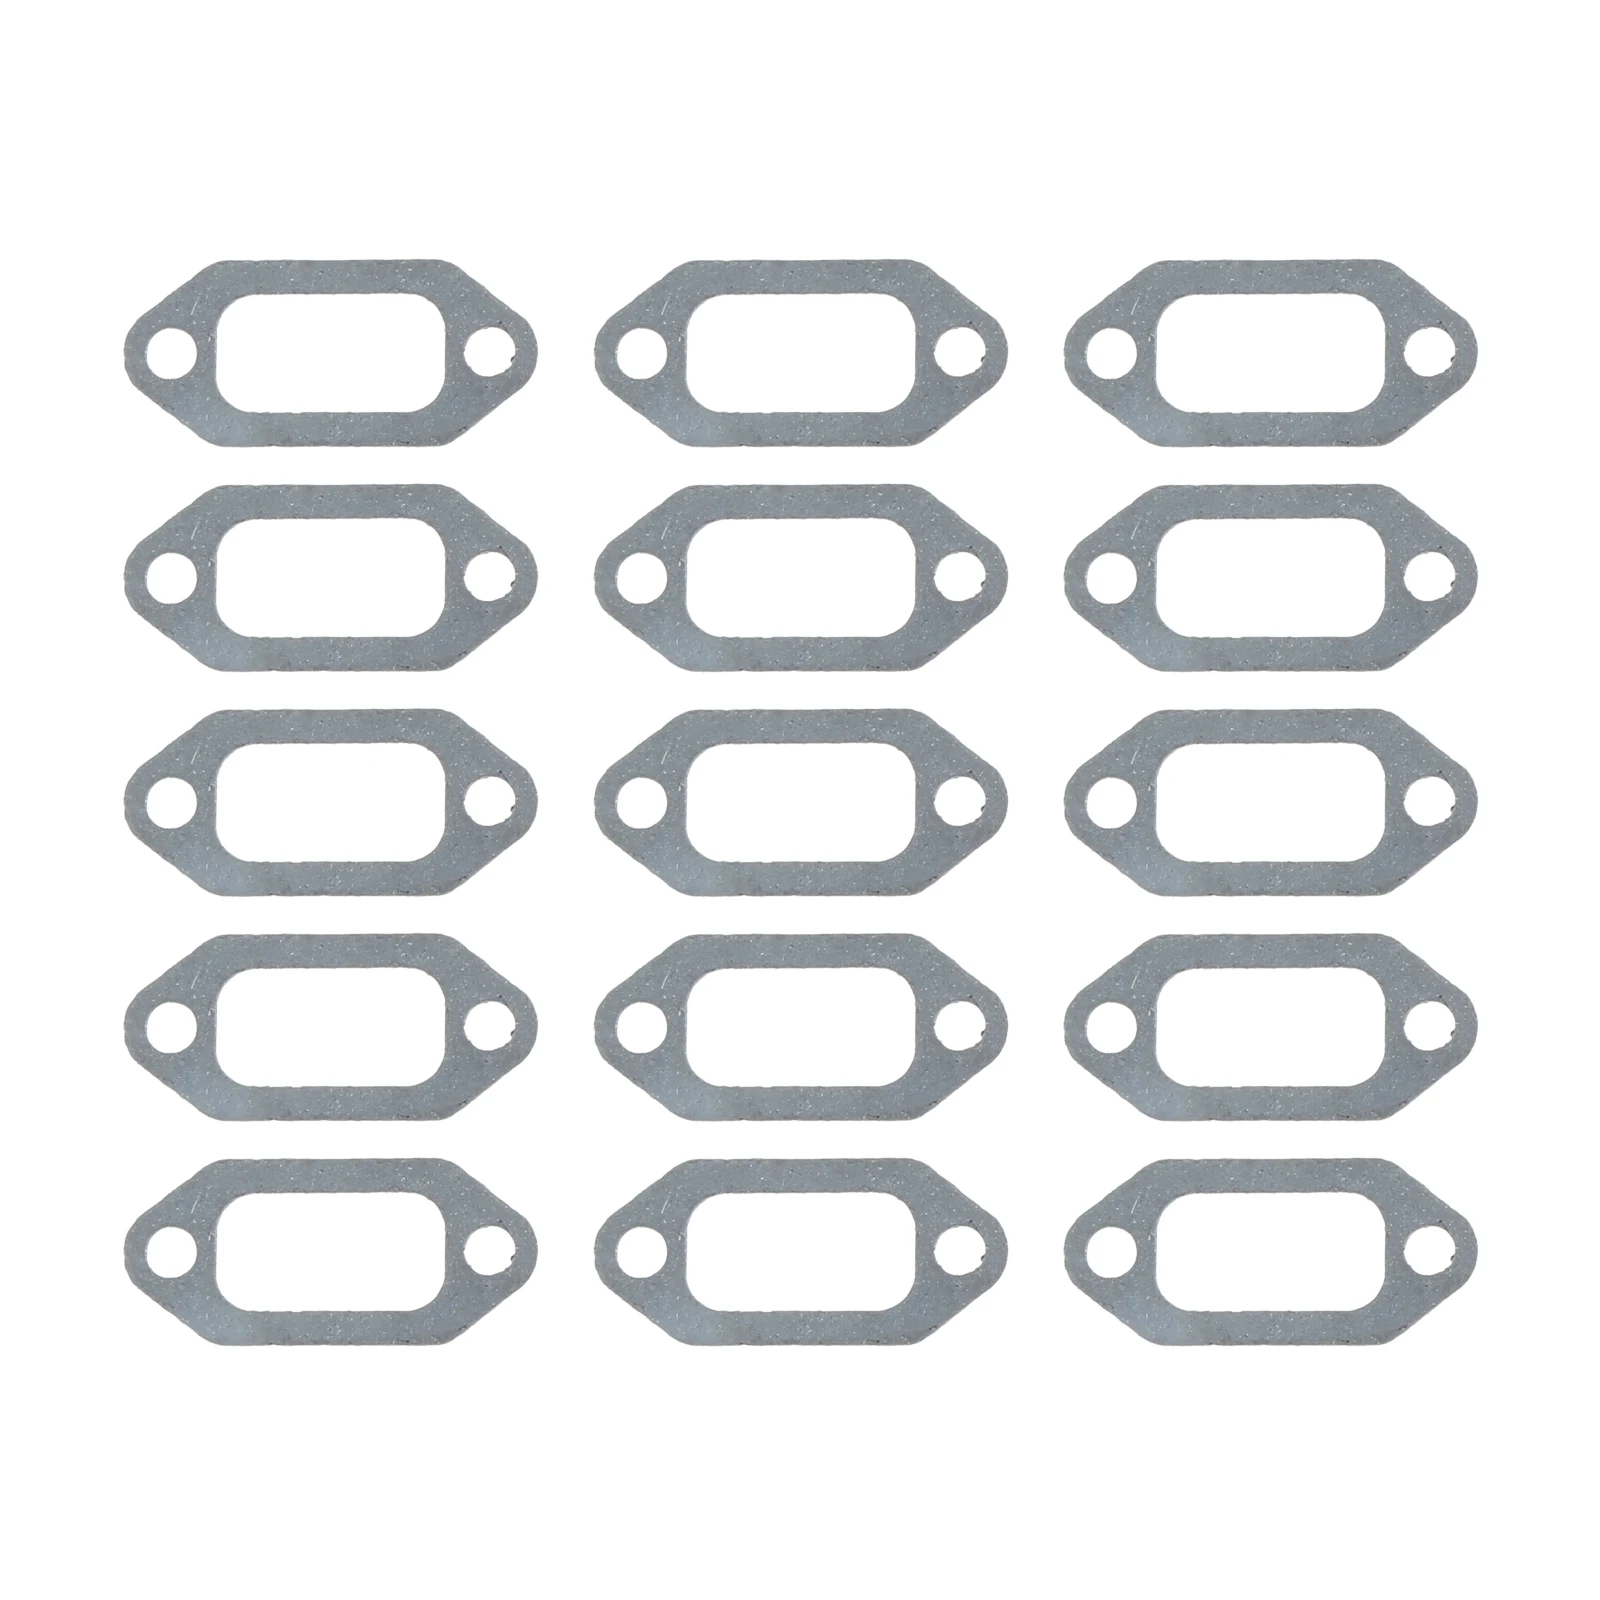 15Pcs Muffler Exhaust Gaskets for Husqvarna 61 66 266 268 272 272XP Chainsaw Replace Part Number 503 40 54-01